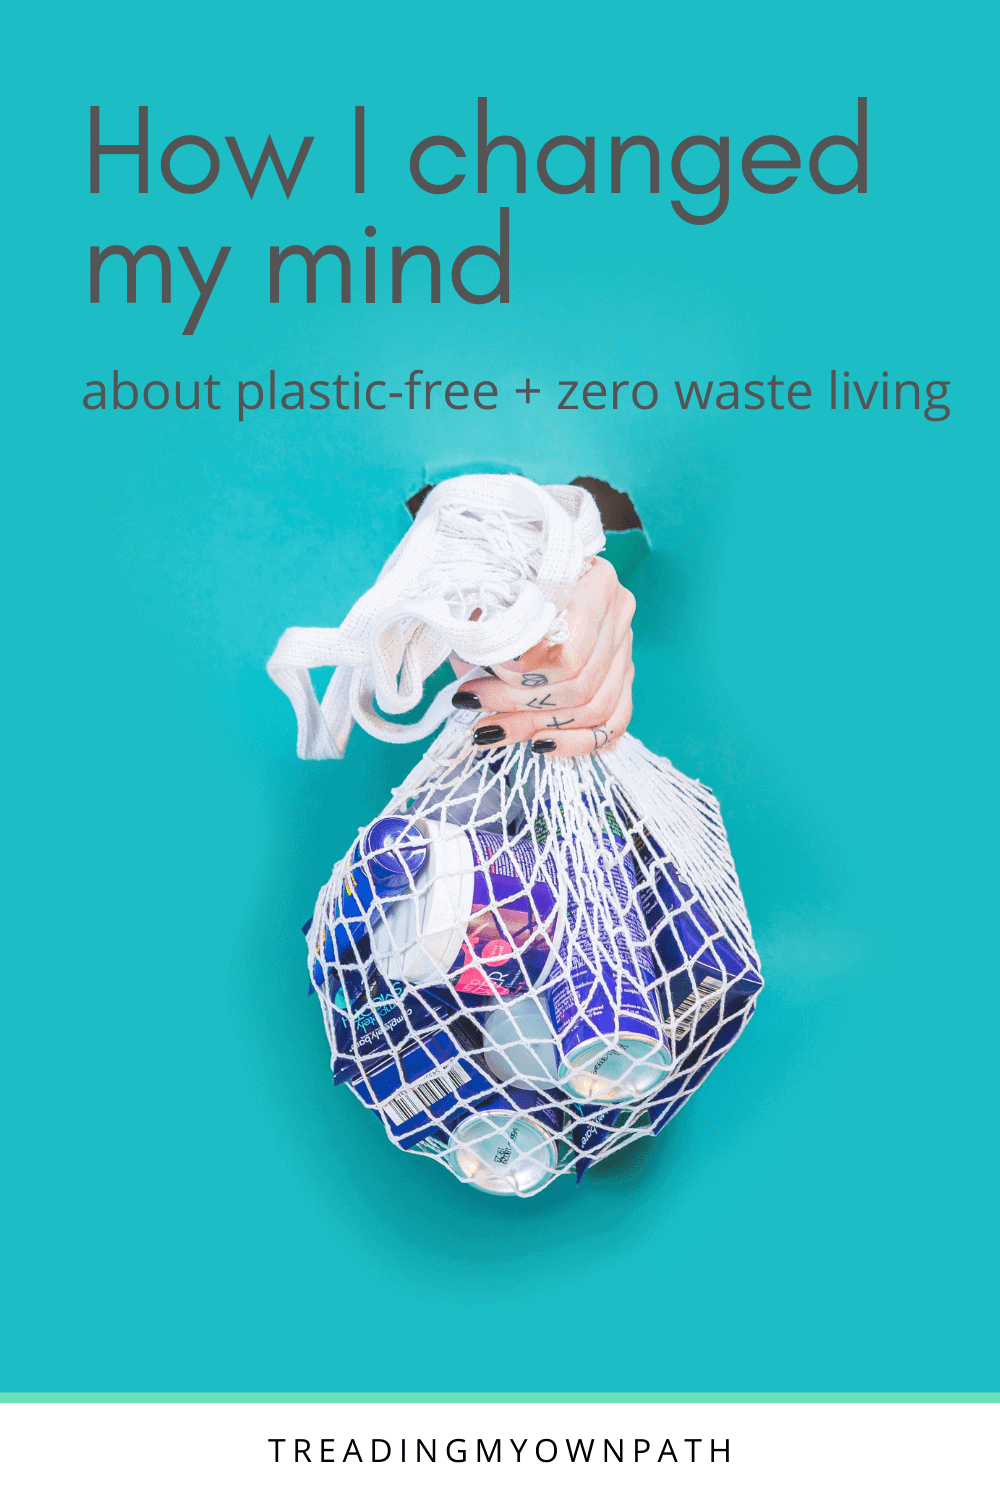 How I changed my mind about living zero waste and plastic-free (a story in 5 stages)